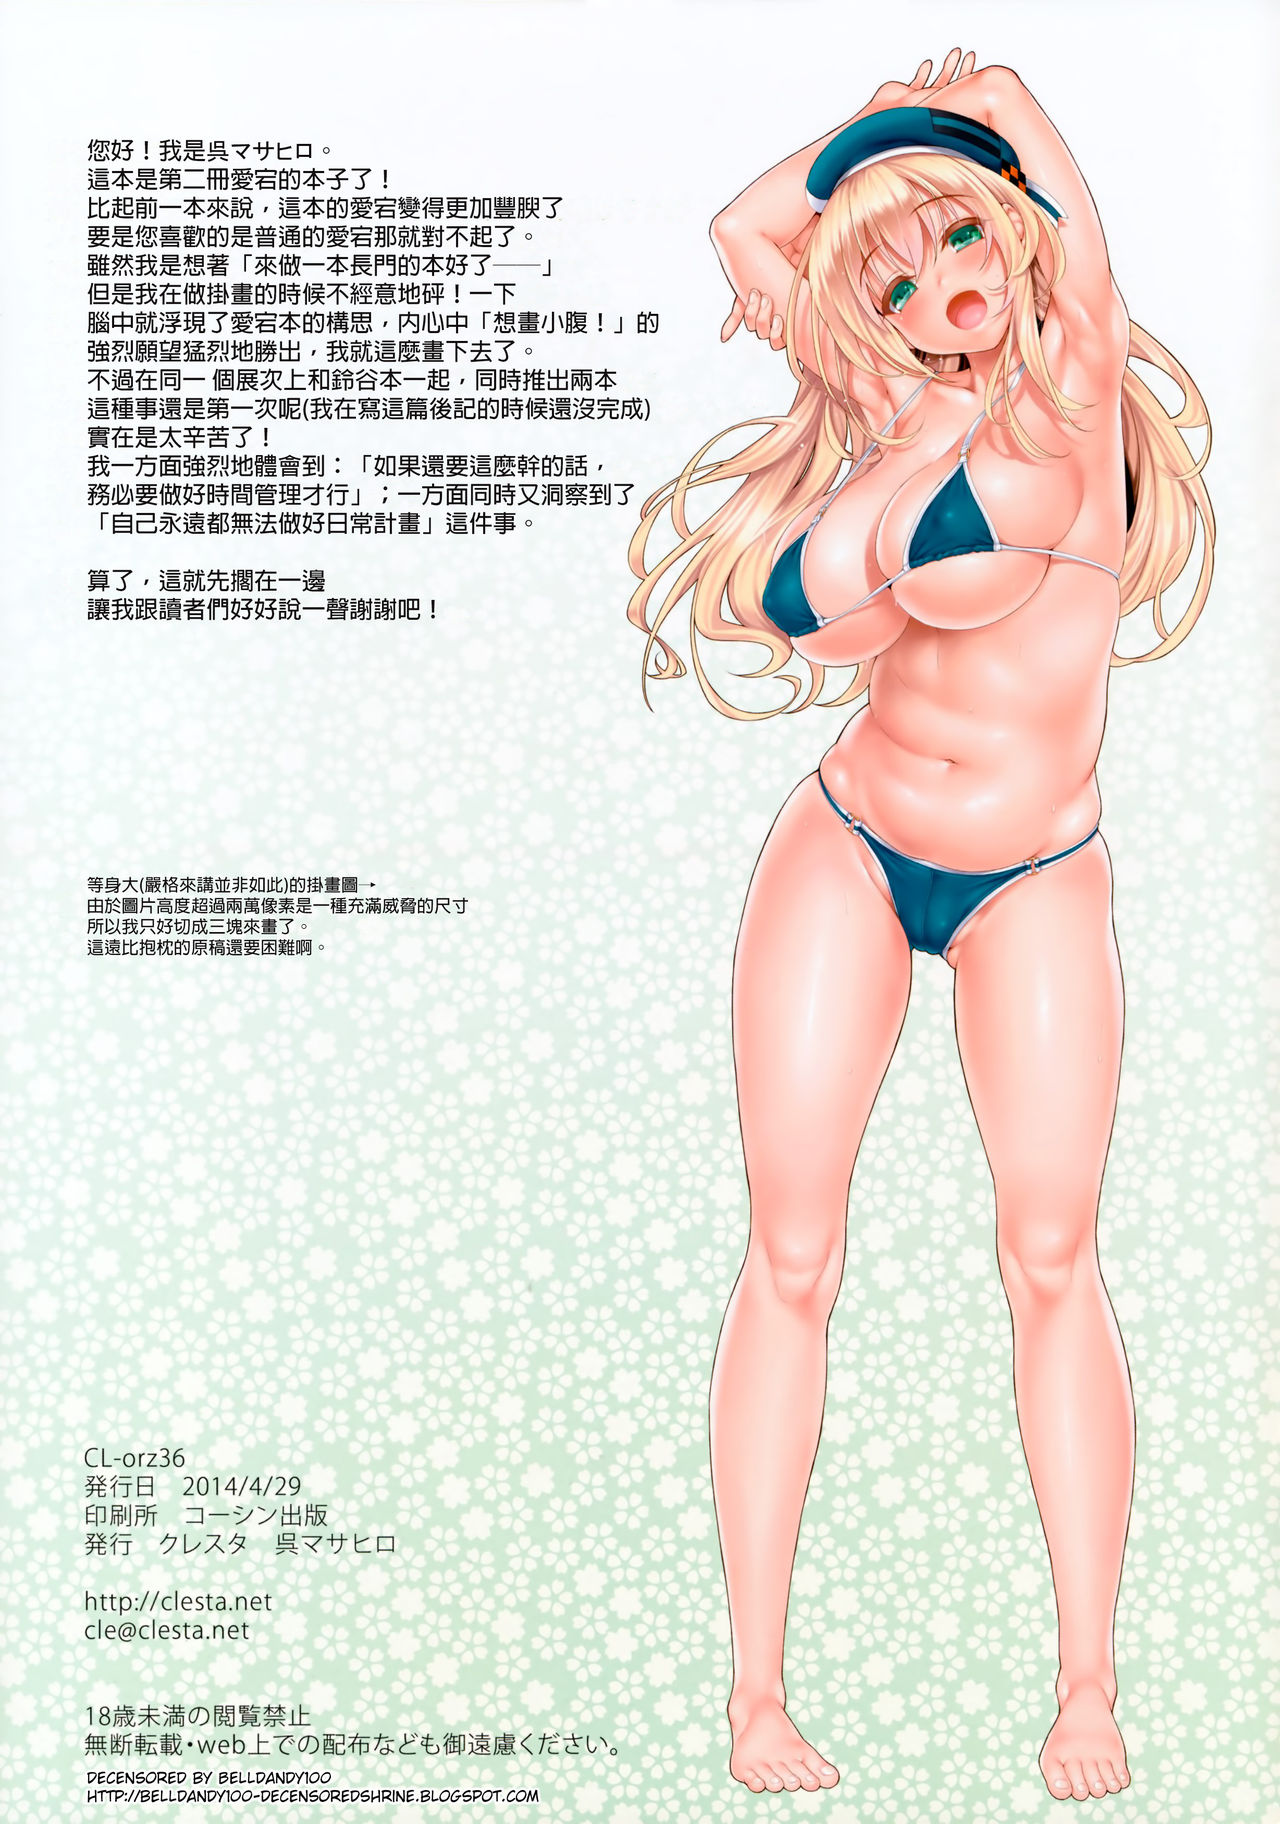 (COMIC1☆8) [Clesta (Cle Masahiro)] CL-orz 36 (Kantai Collection -KanColle-) [Chinese] [final個人漢化] [Decensored] page 17 full